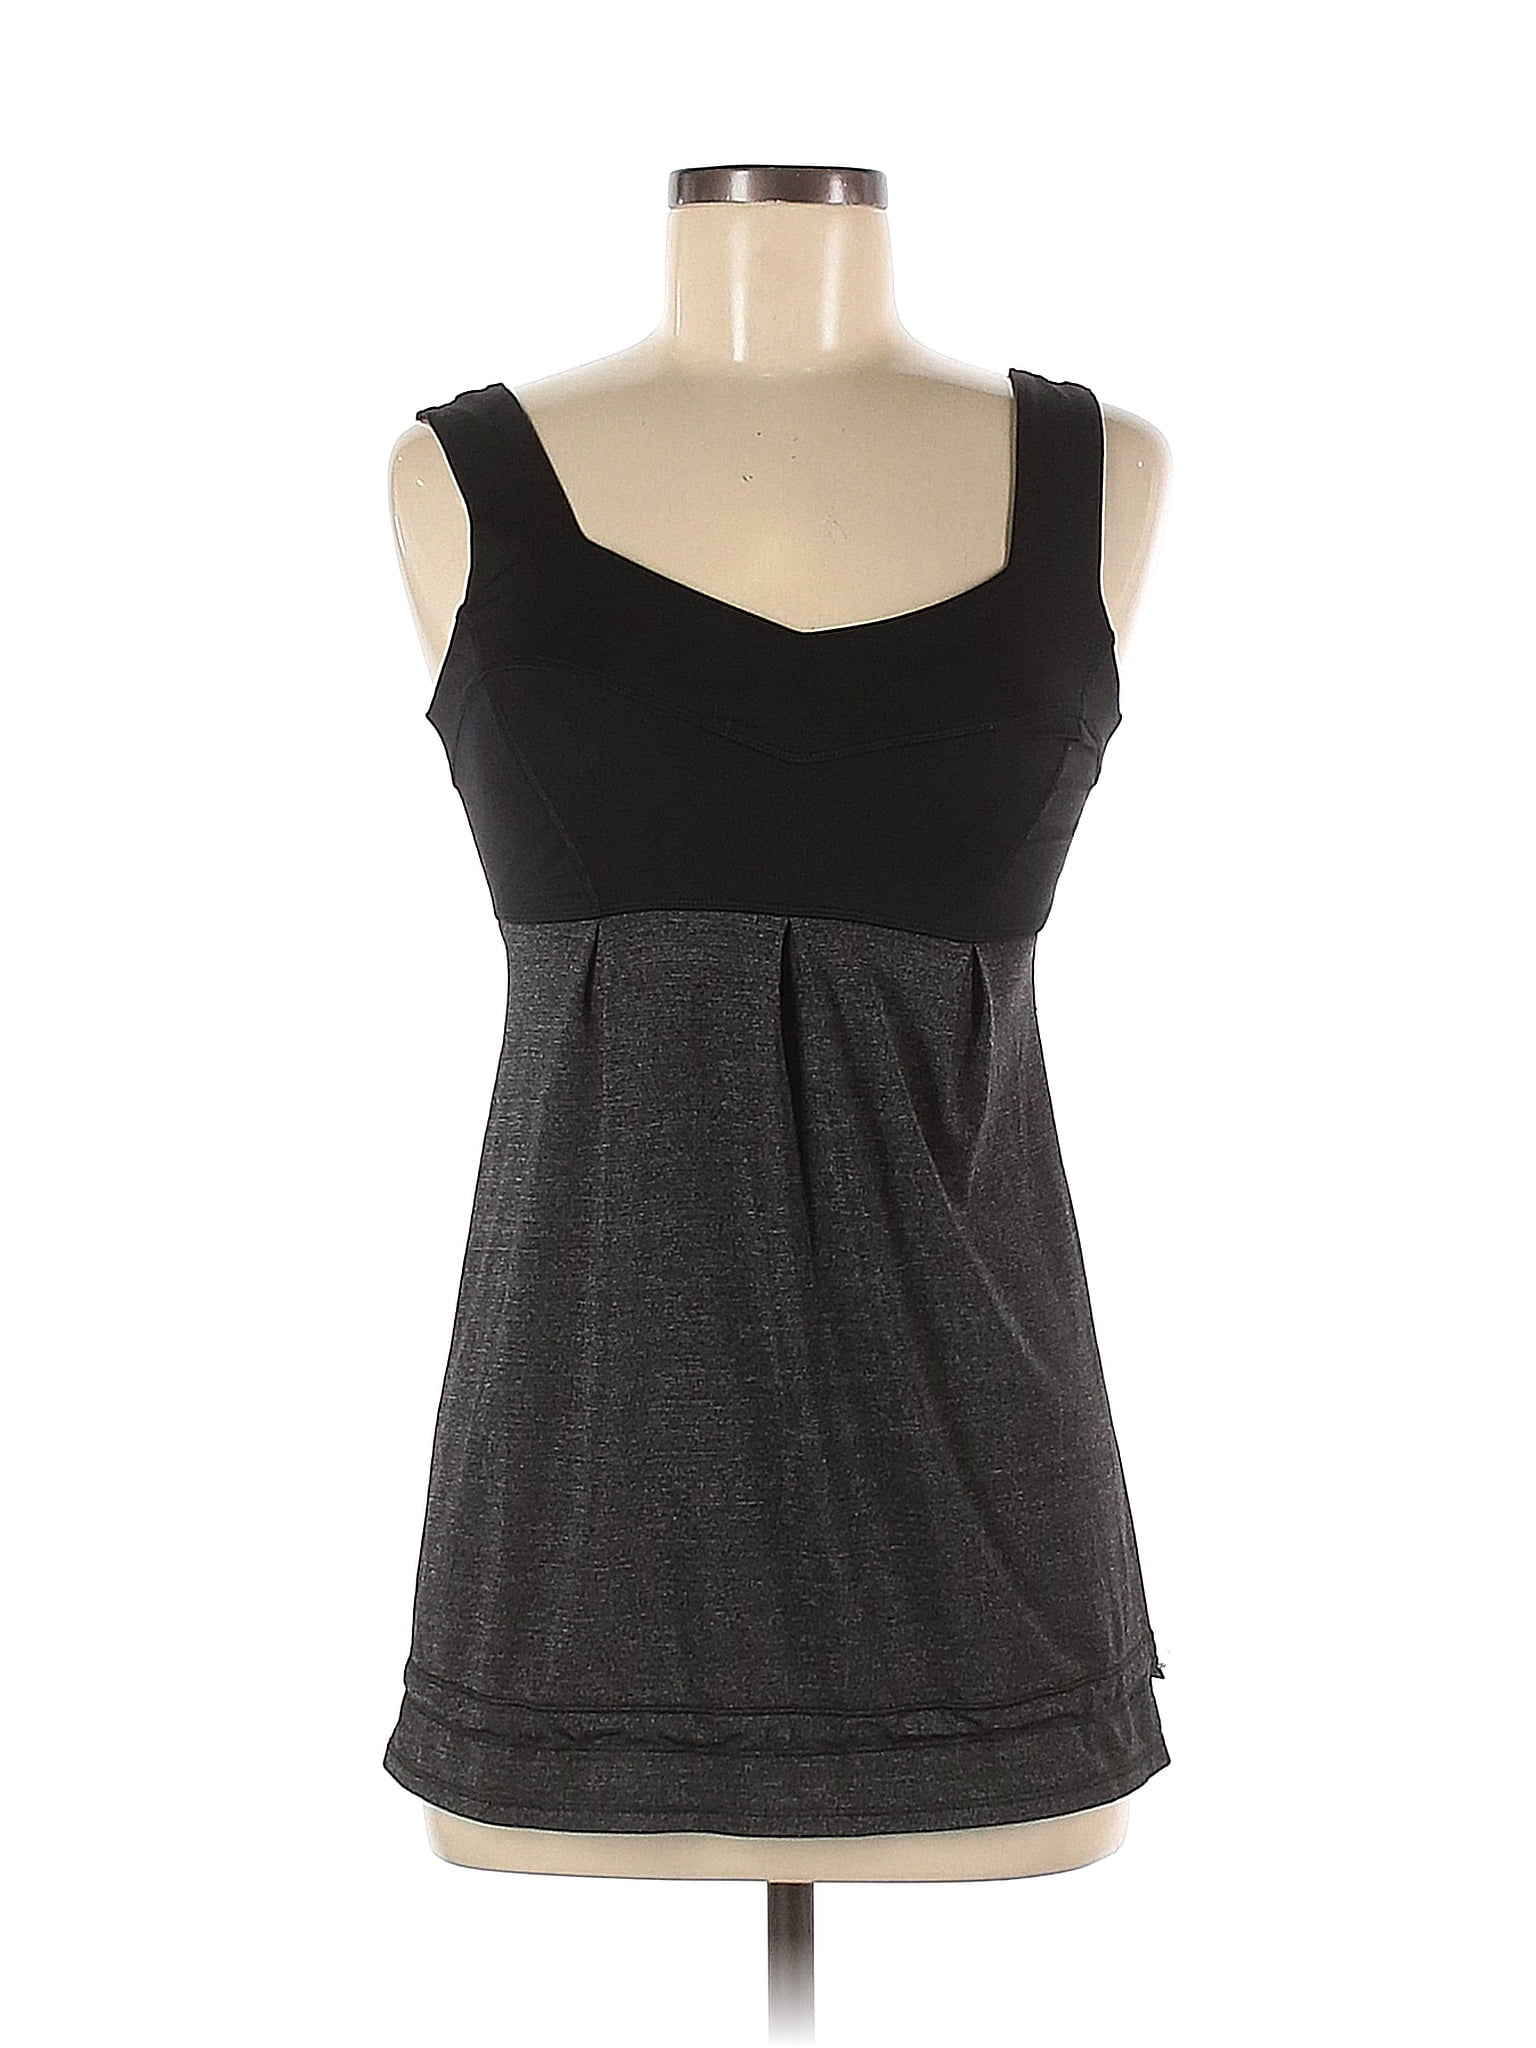 Pre-Owned Lululemon Athletica Womens Size 6 Active Nepal